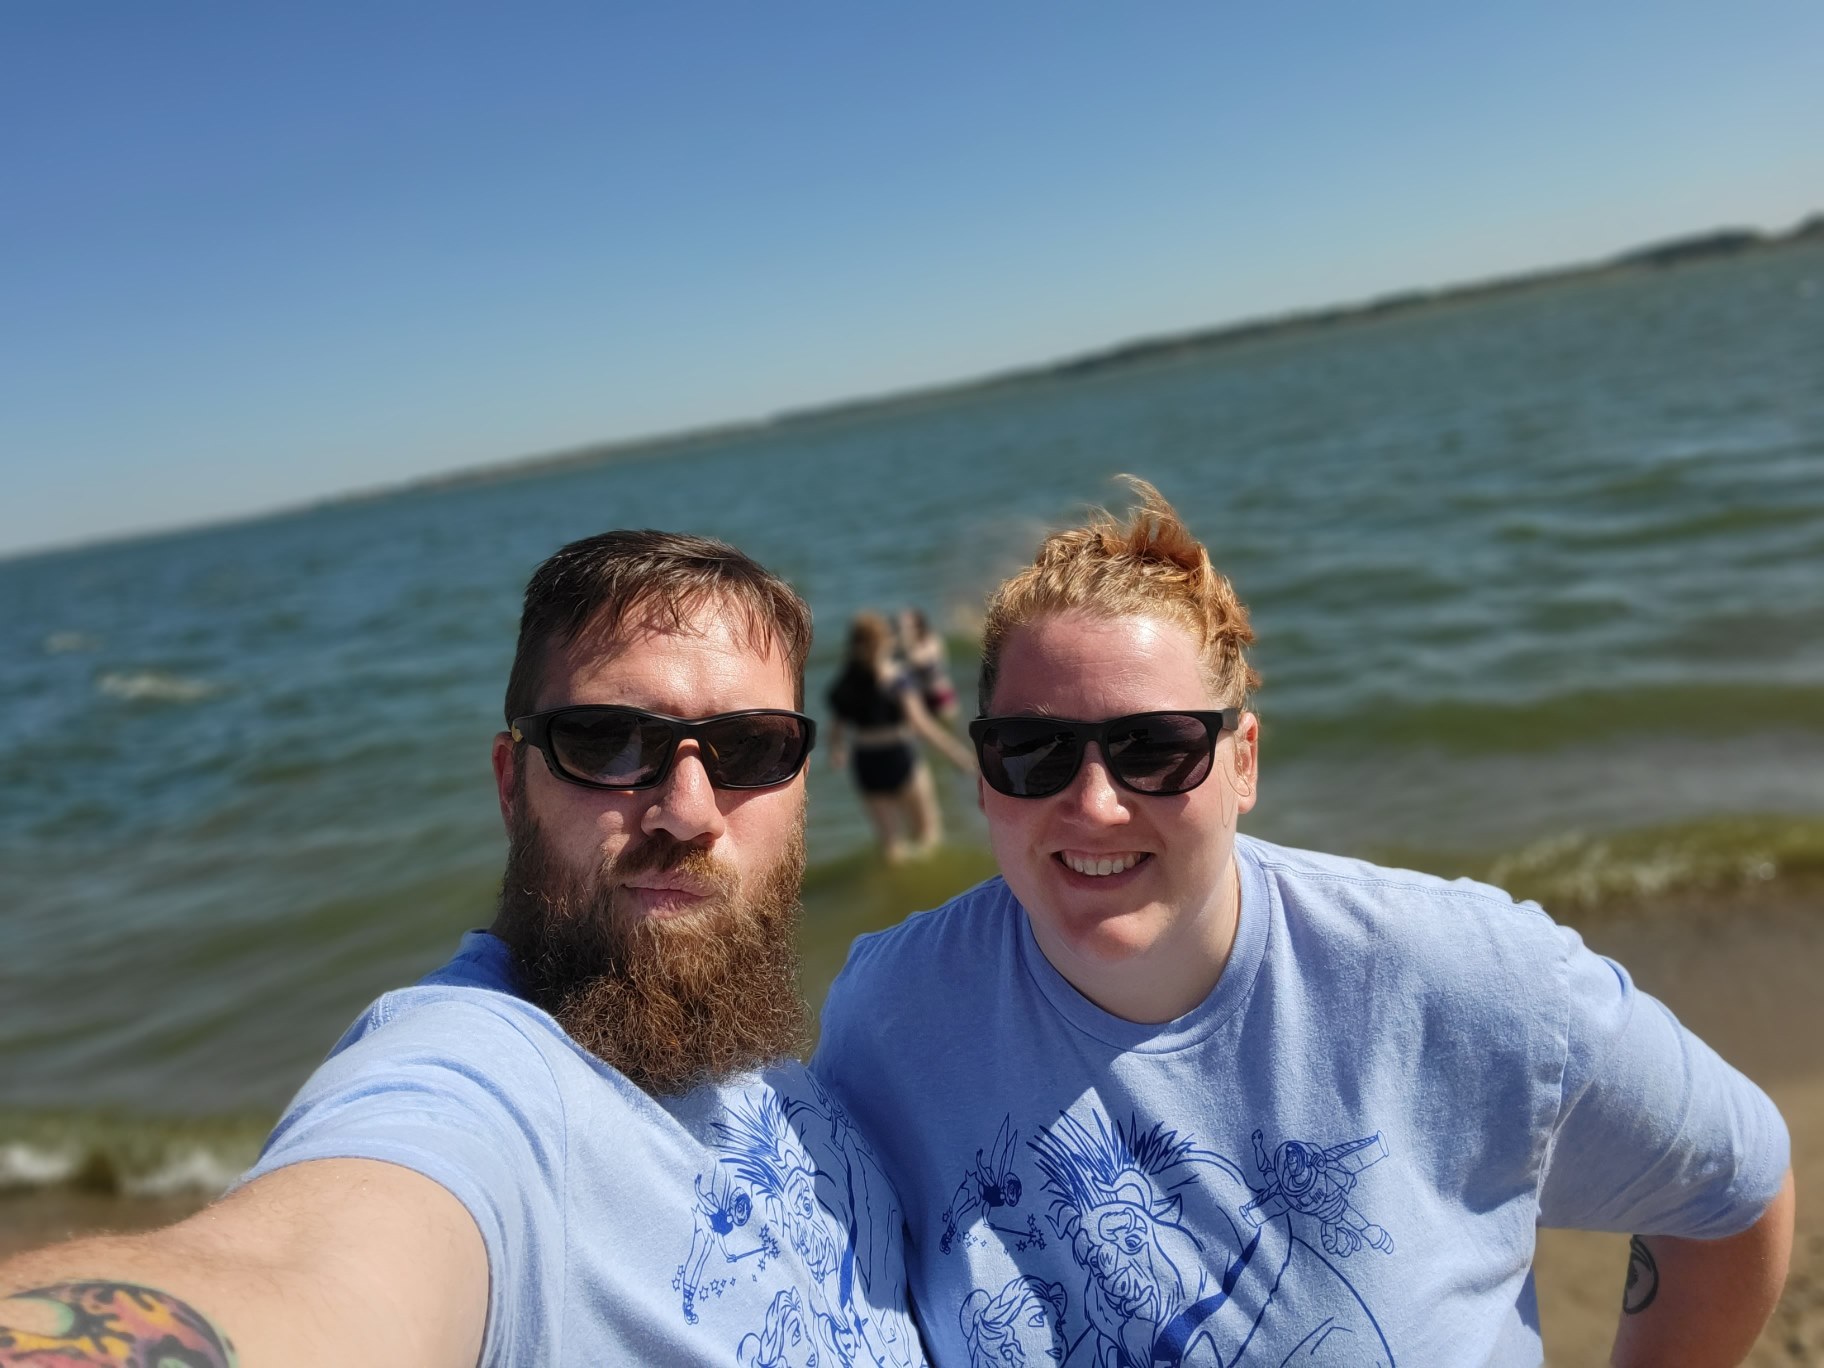 A man and womantaking a selfie in front of water